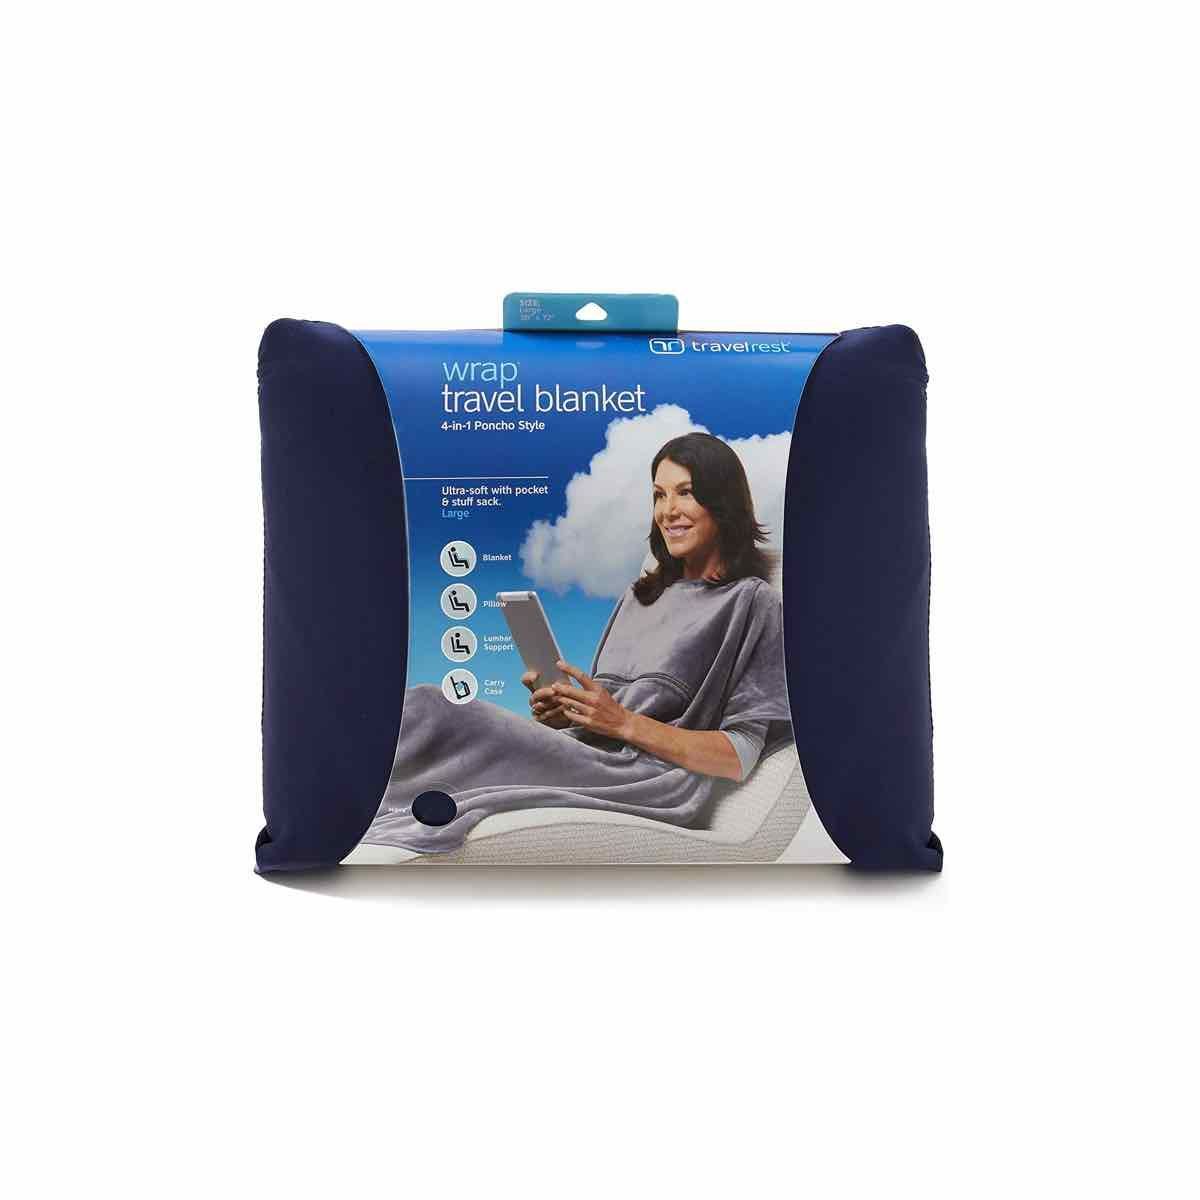 13 Best Travel Blankets For Airplanes 2020